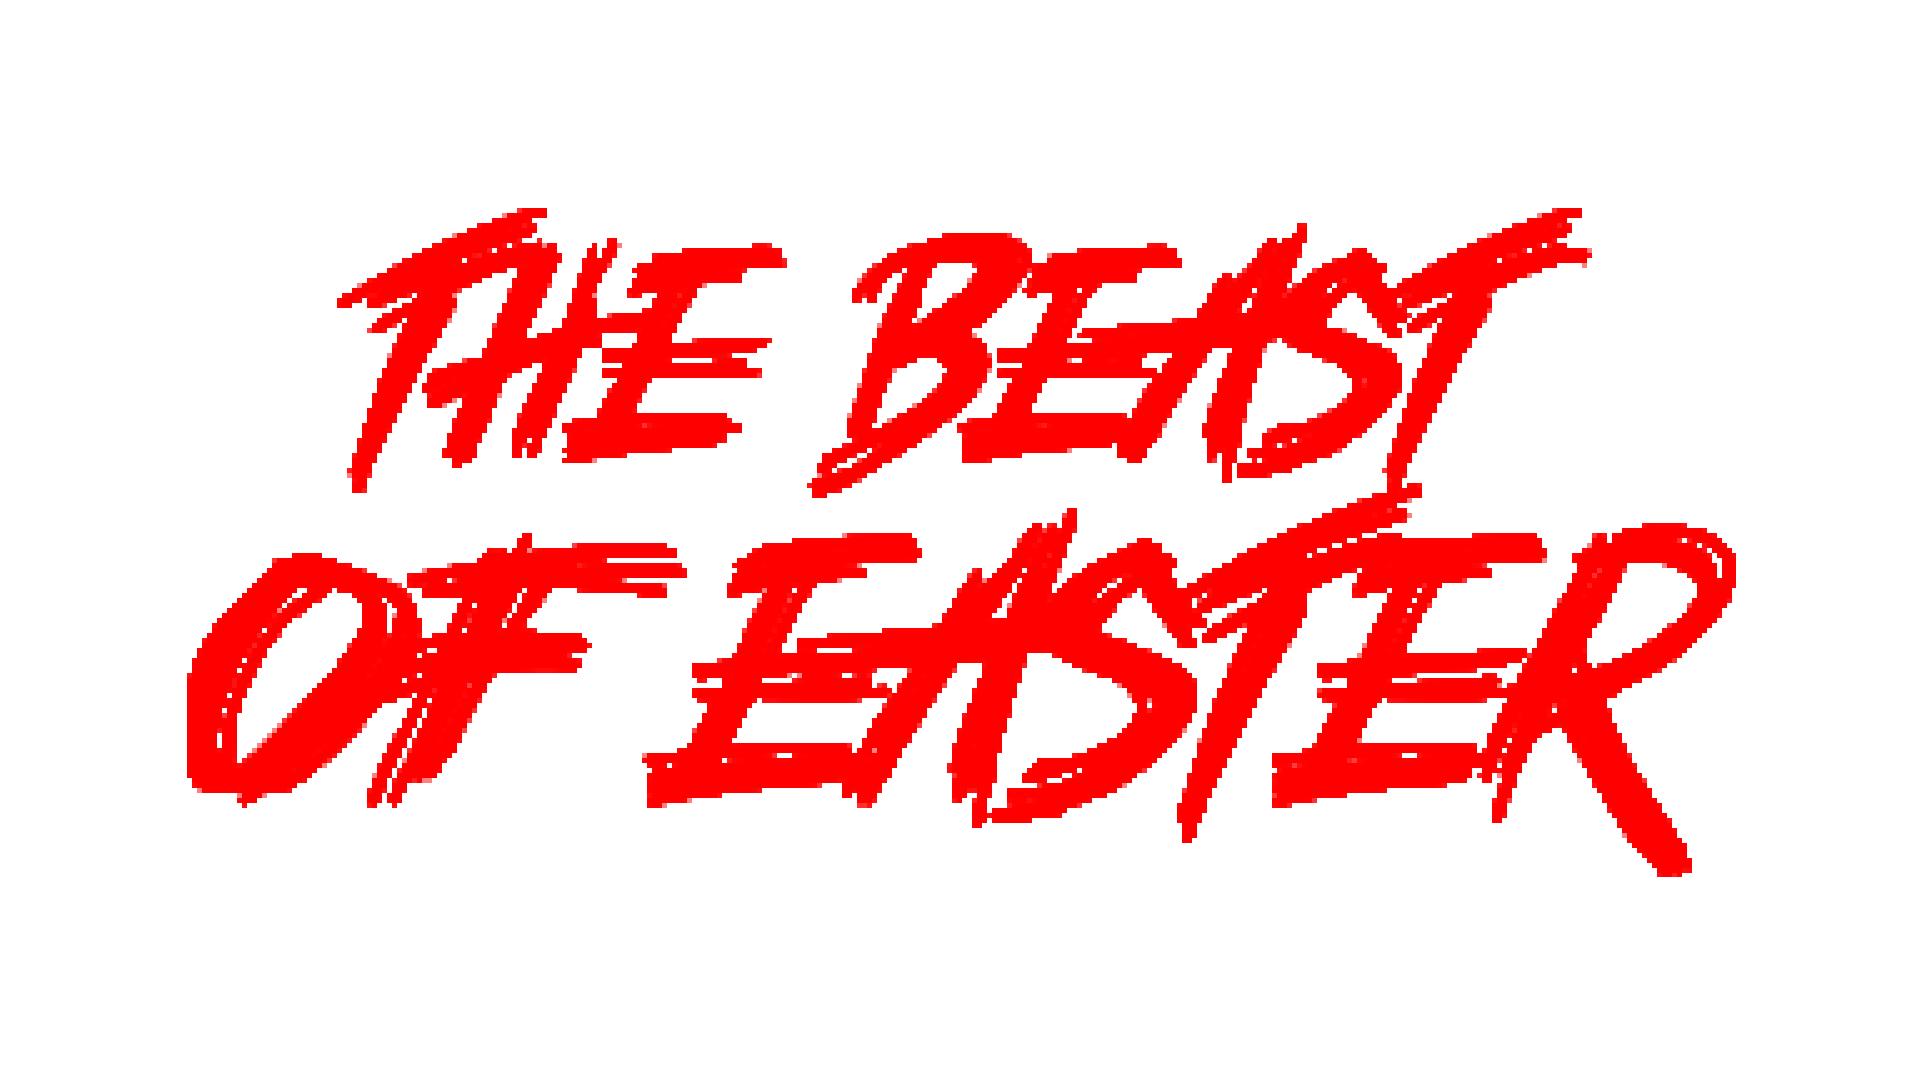 THE BEAST OF EASTER